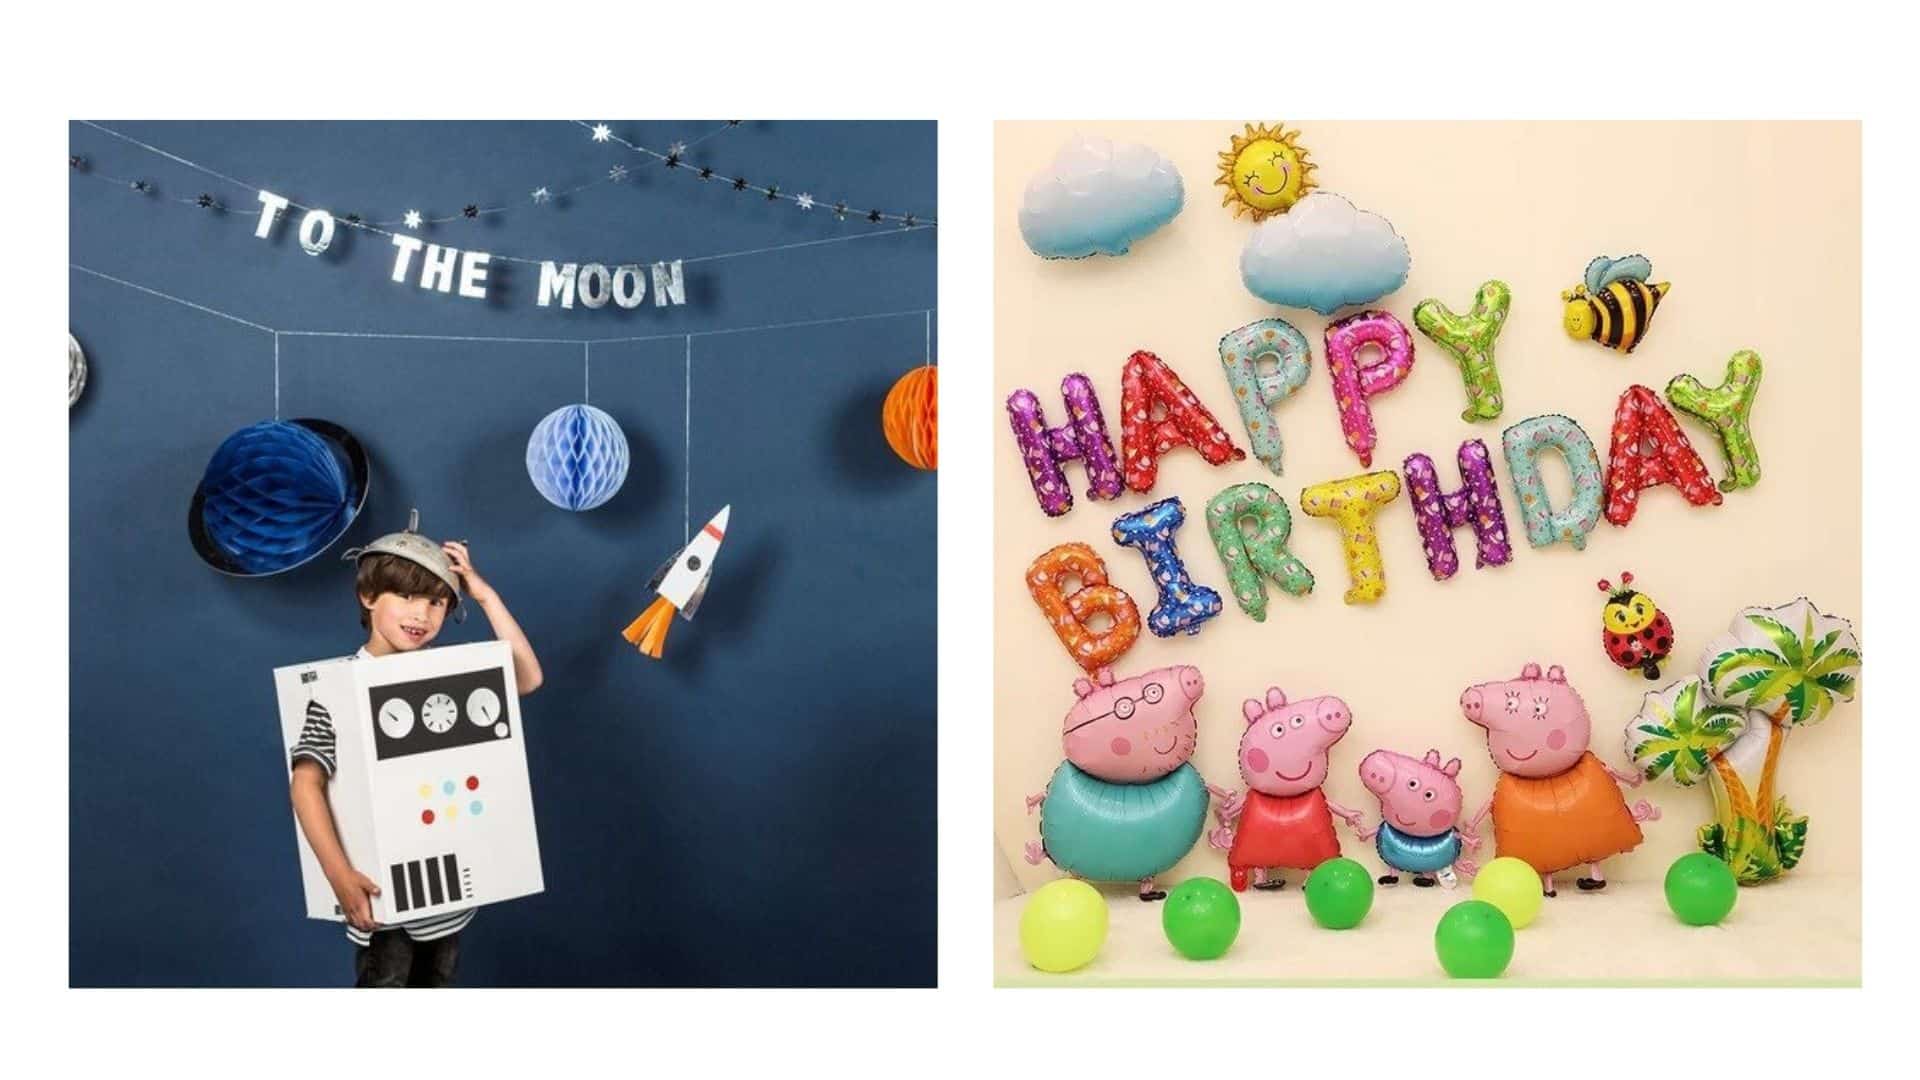 A split image, one showing a kid in a homemade space rocket outfit with space themed party decorations behind him, and the other showing balloons shaped into the characters from Peppa Pig with the words Happy Birthday behind.